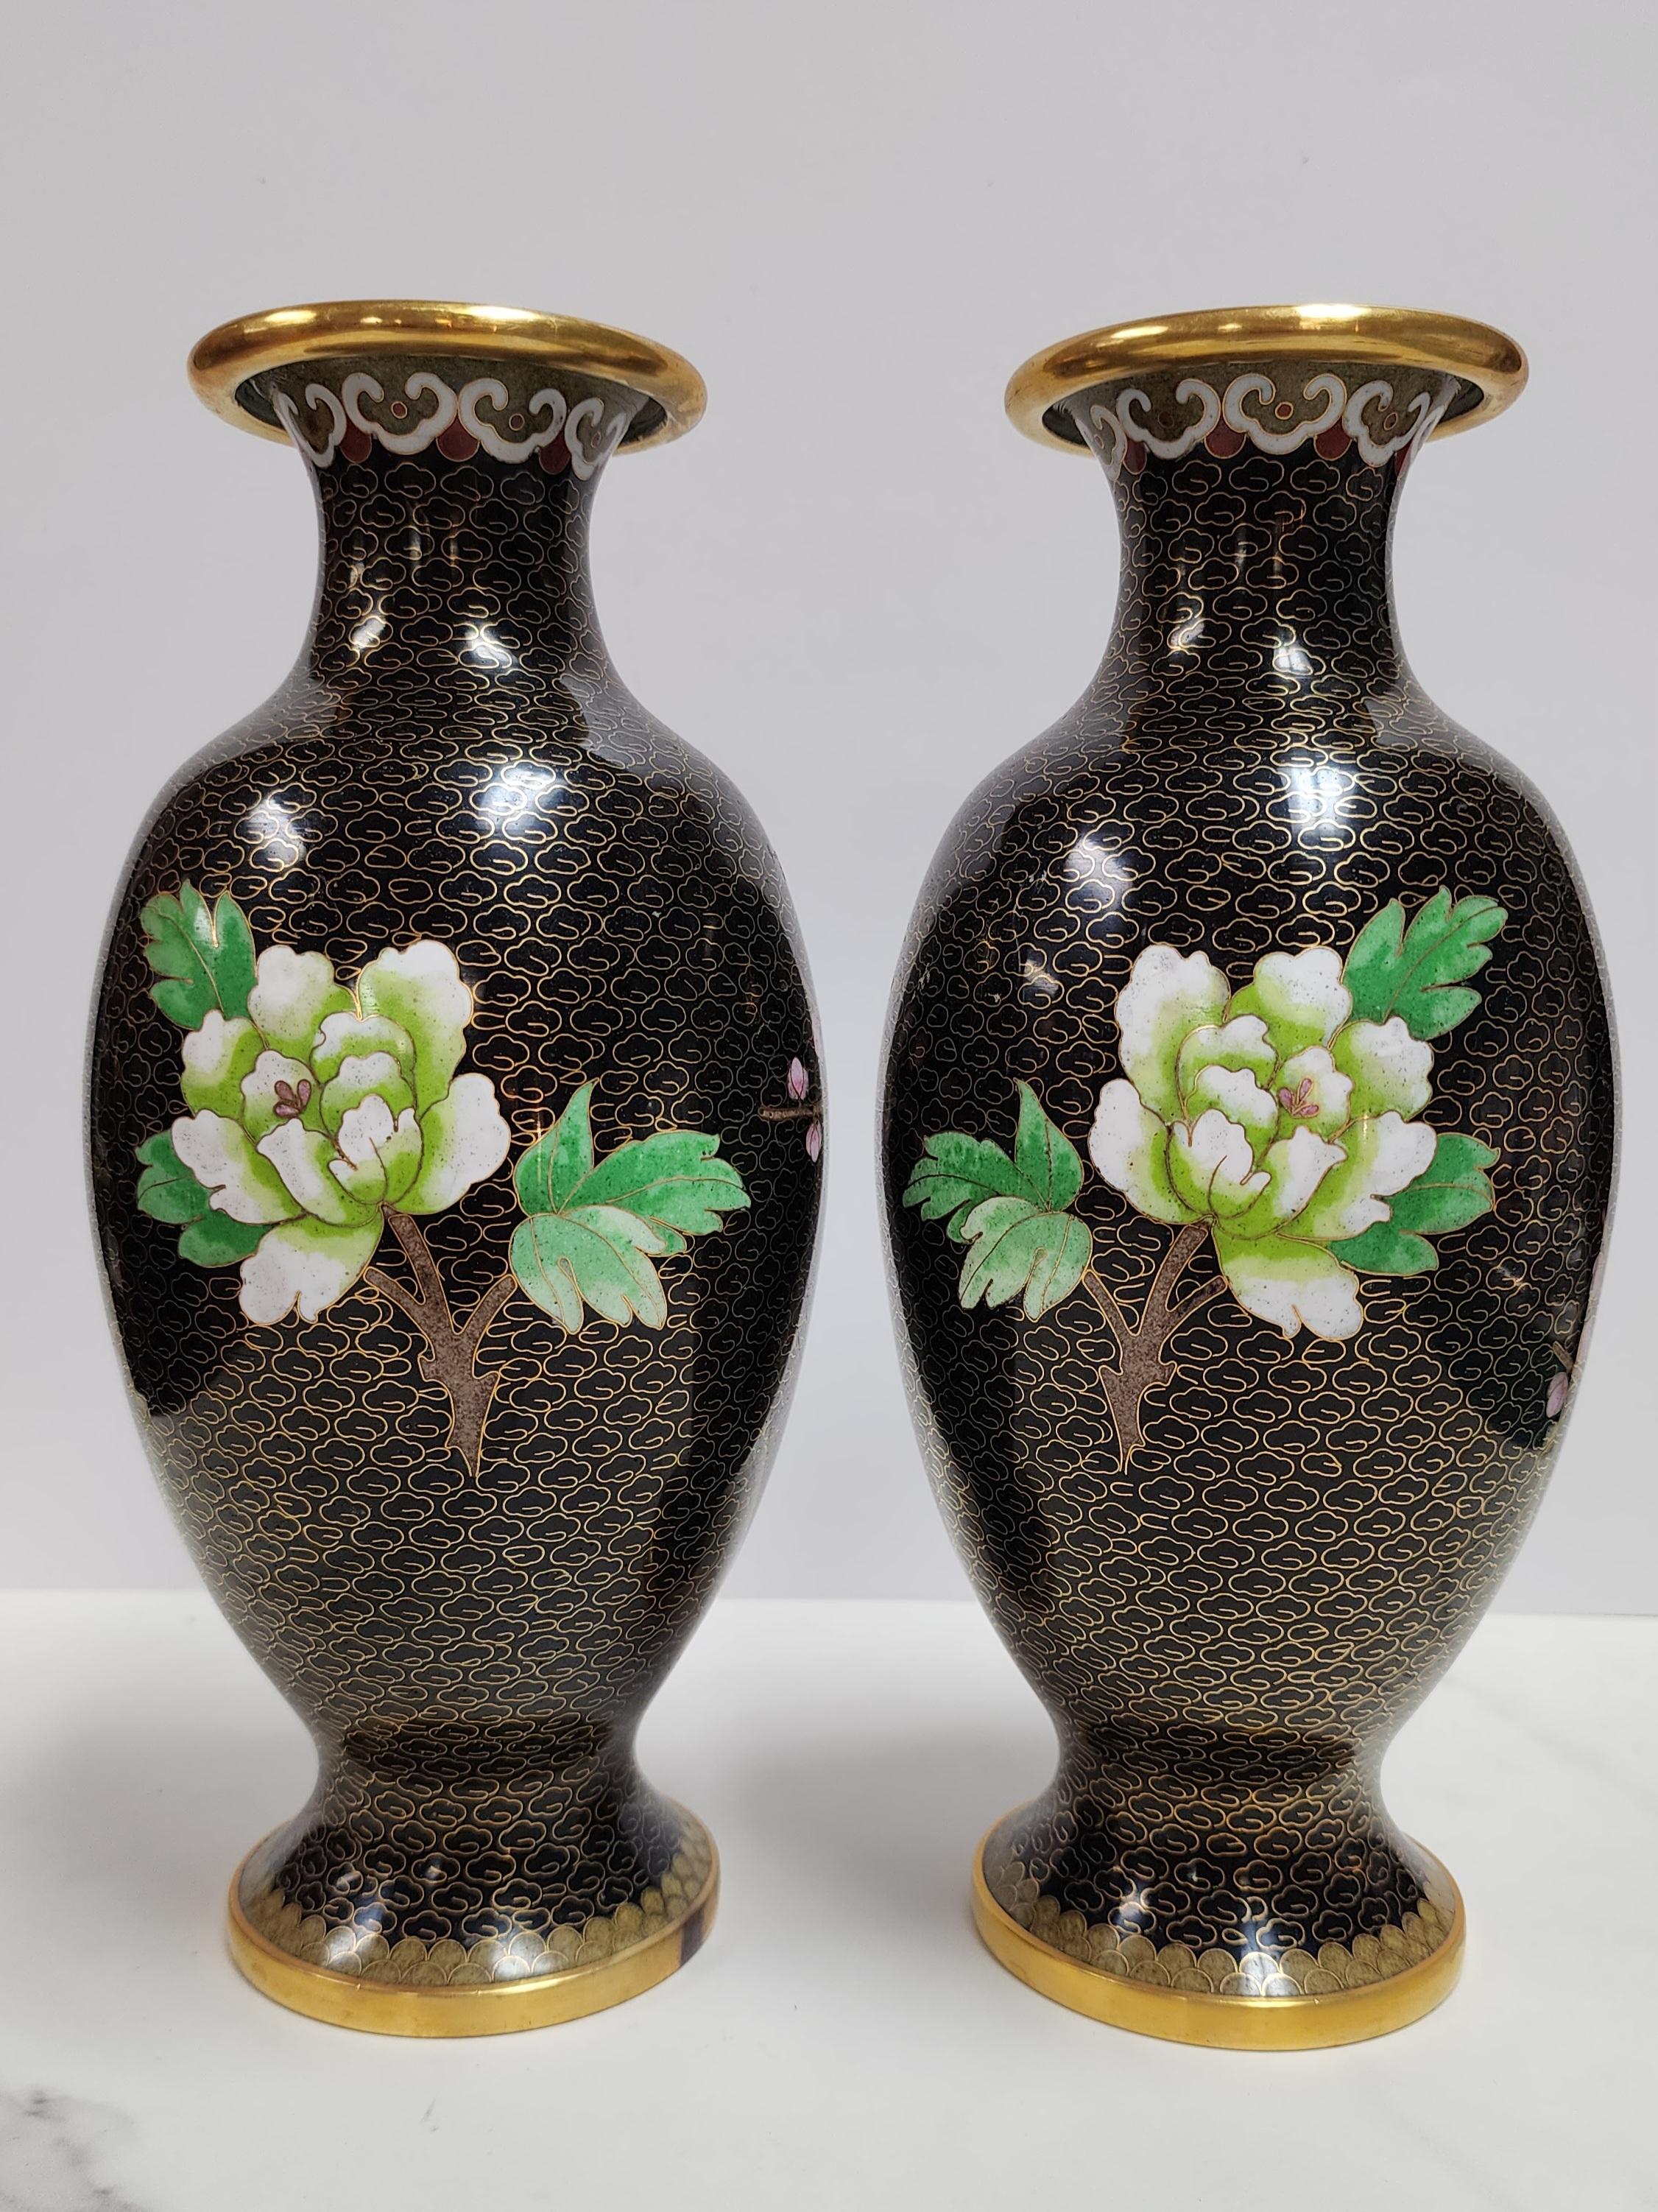 Pair of Mirrored Chinese Cloisonne Enamel Vase with Flower and Bird Motif For Sale 4